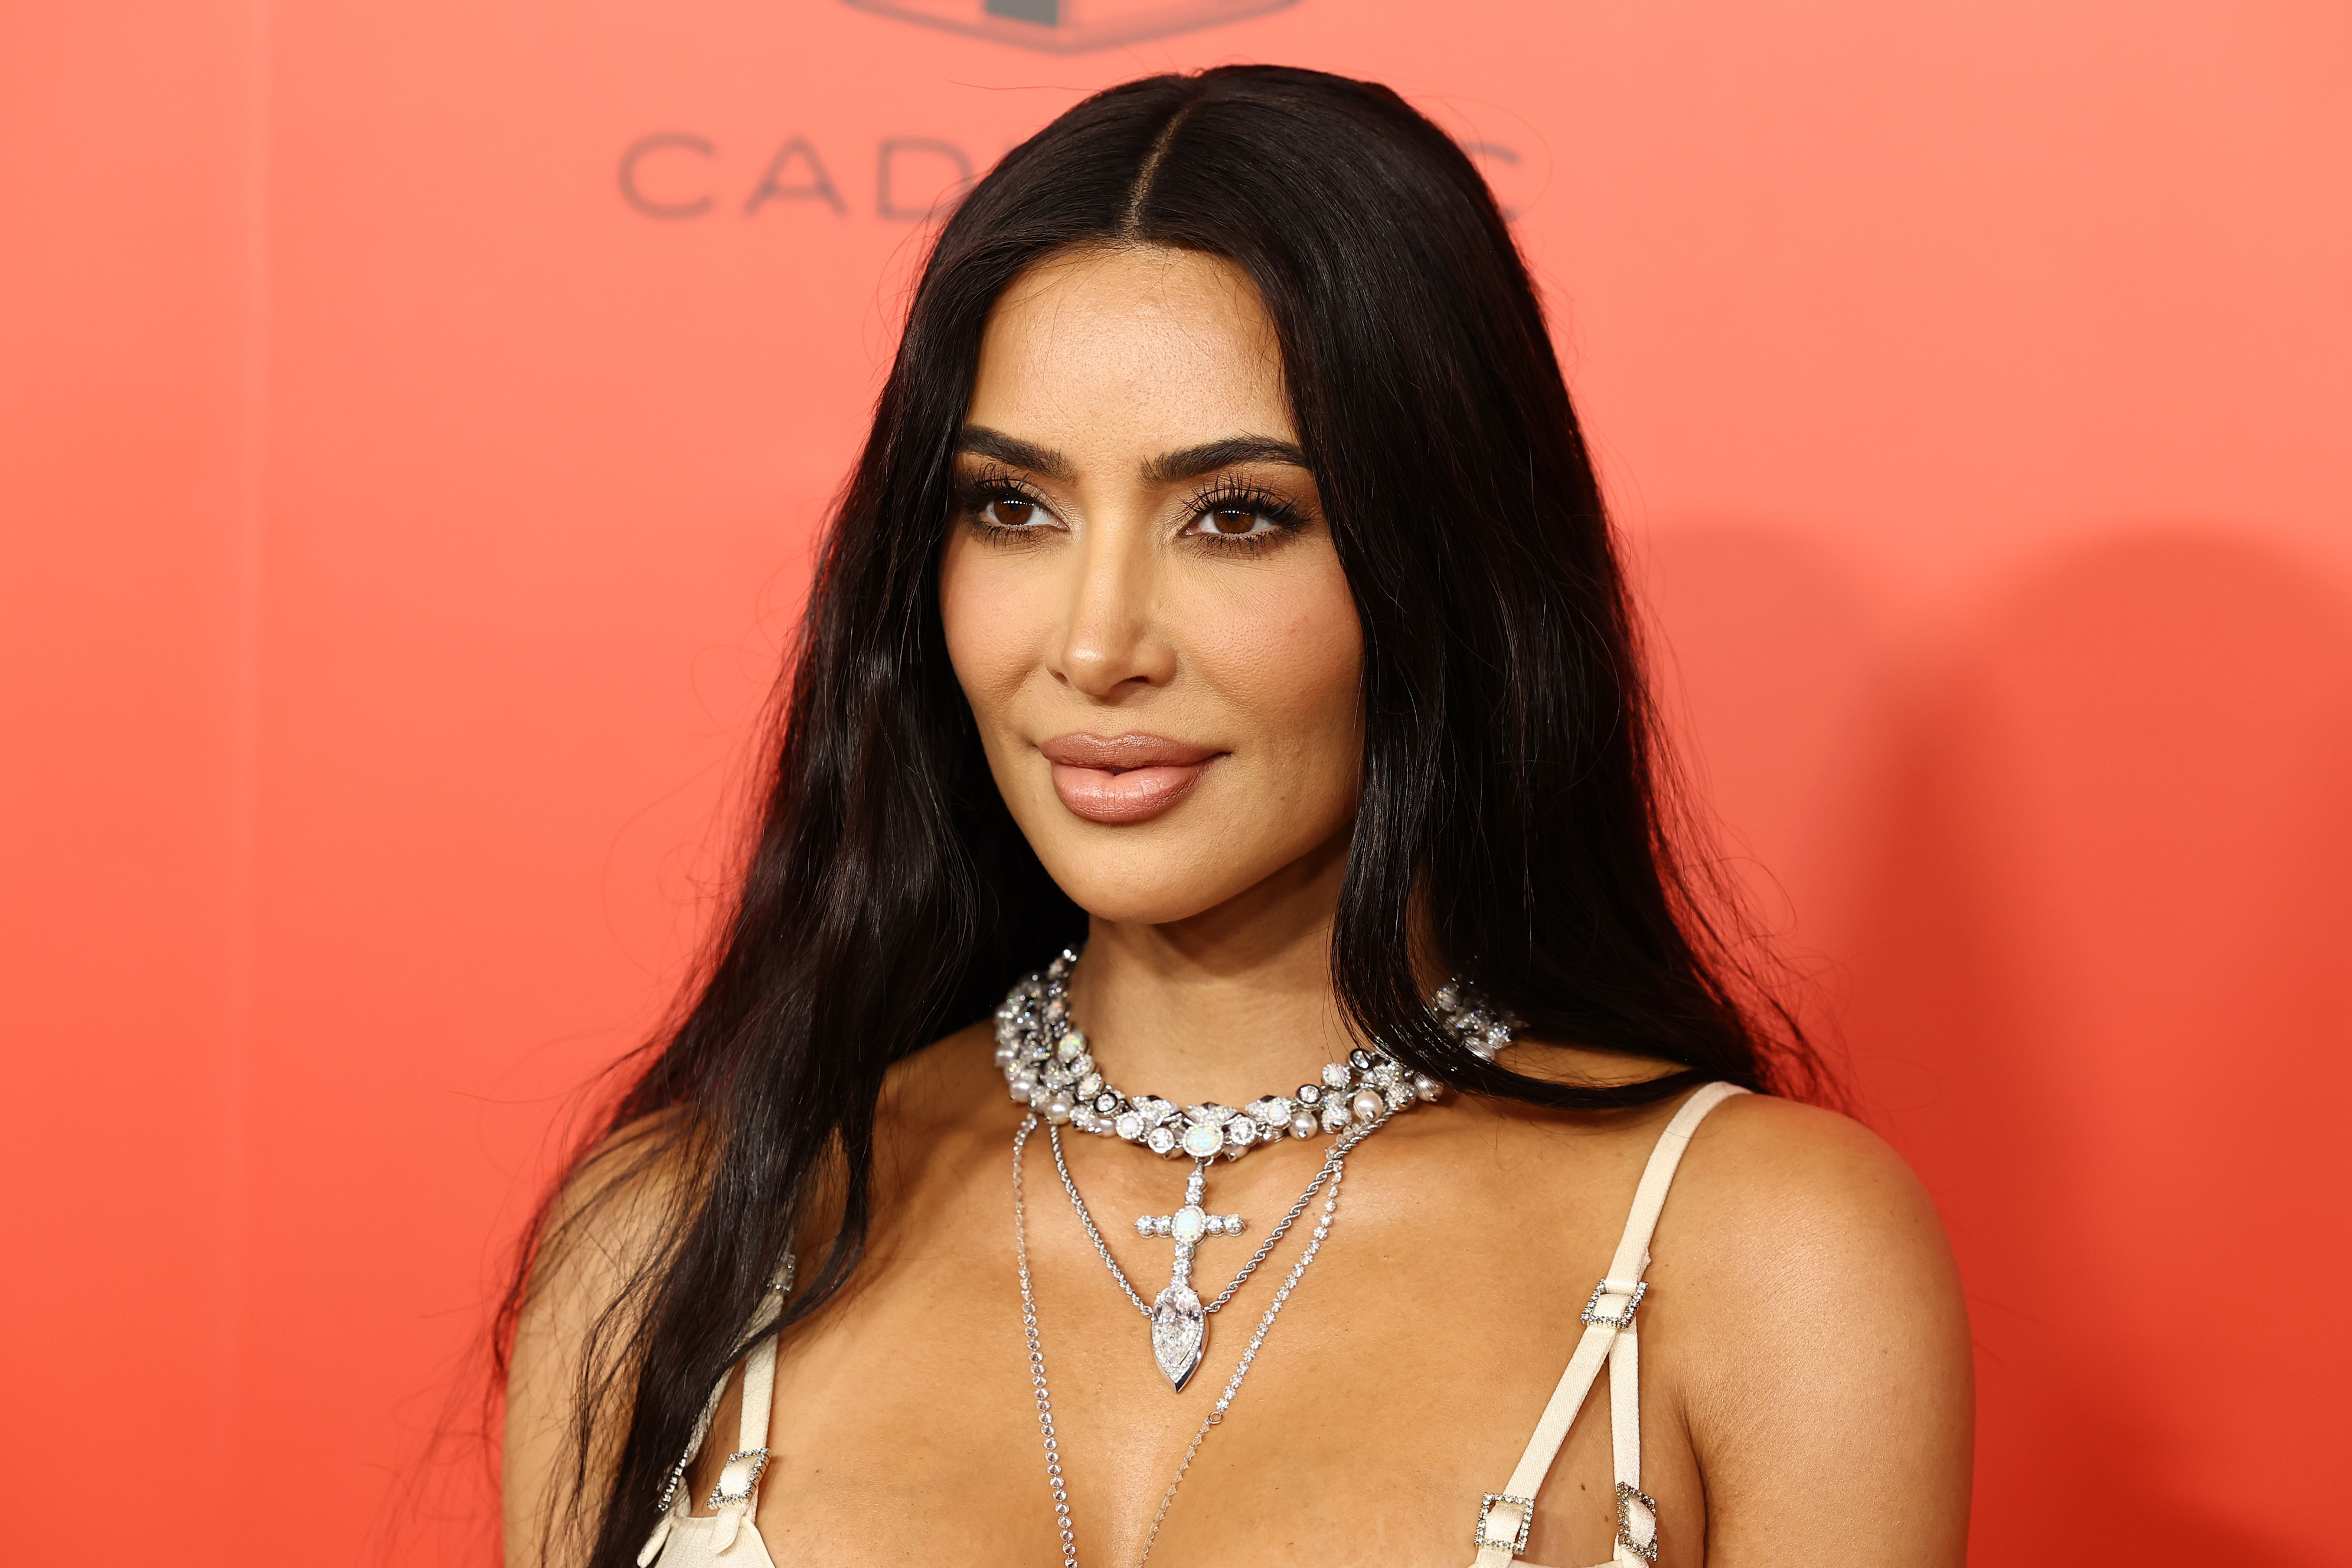 Kim Kardashian posing at an event, wearing a diamond necklace and a strappy dress